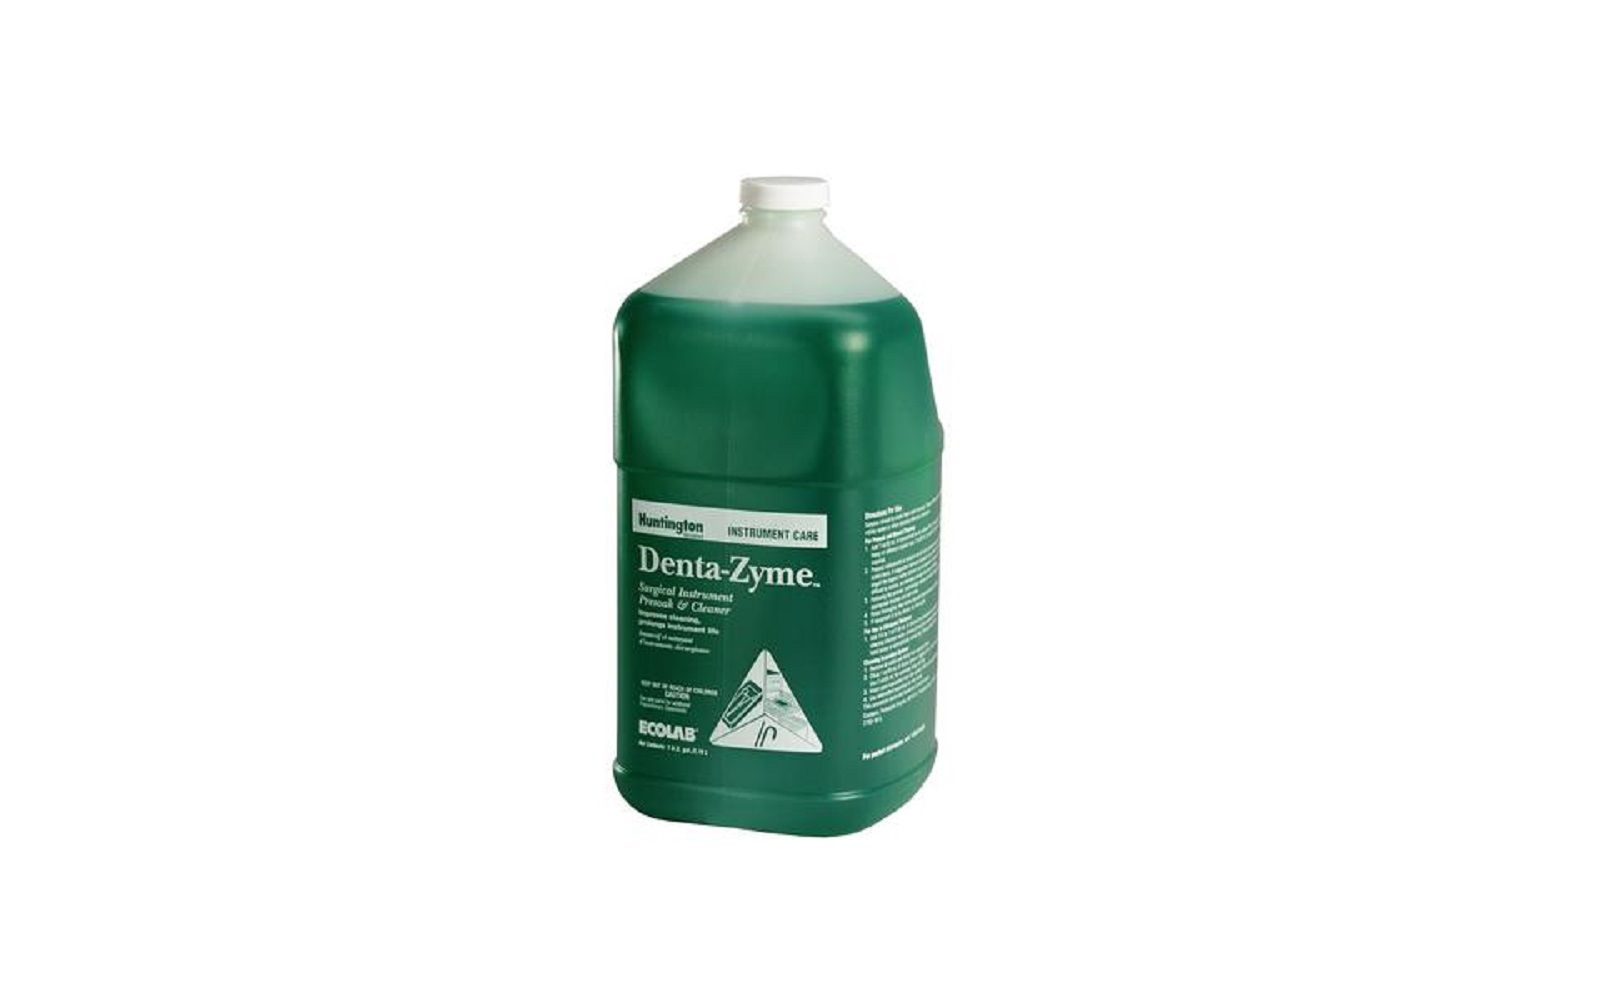 Denta-zyme™ surgical instrument presoak and cleaner, 1 gallon bottle